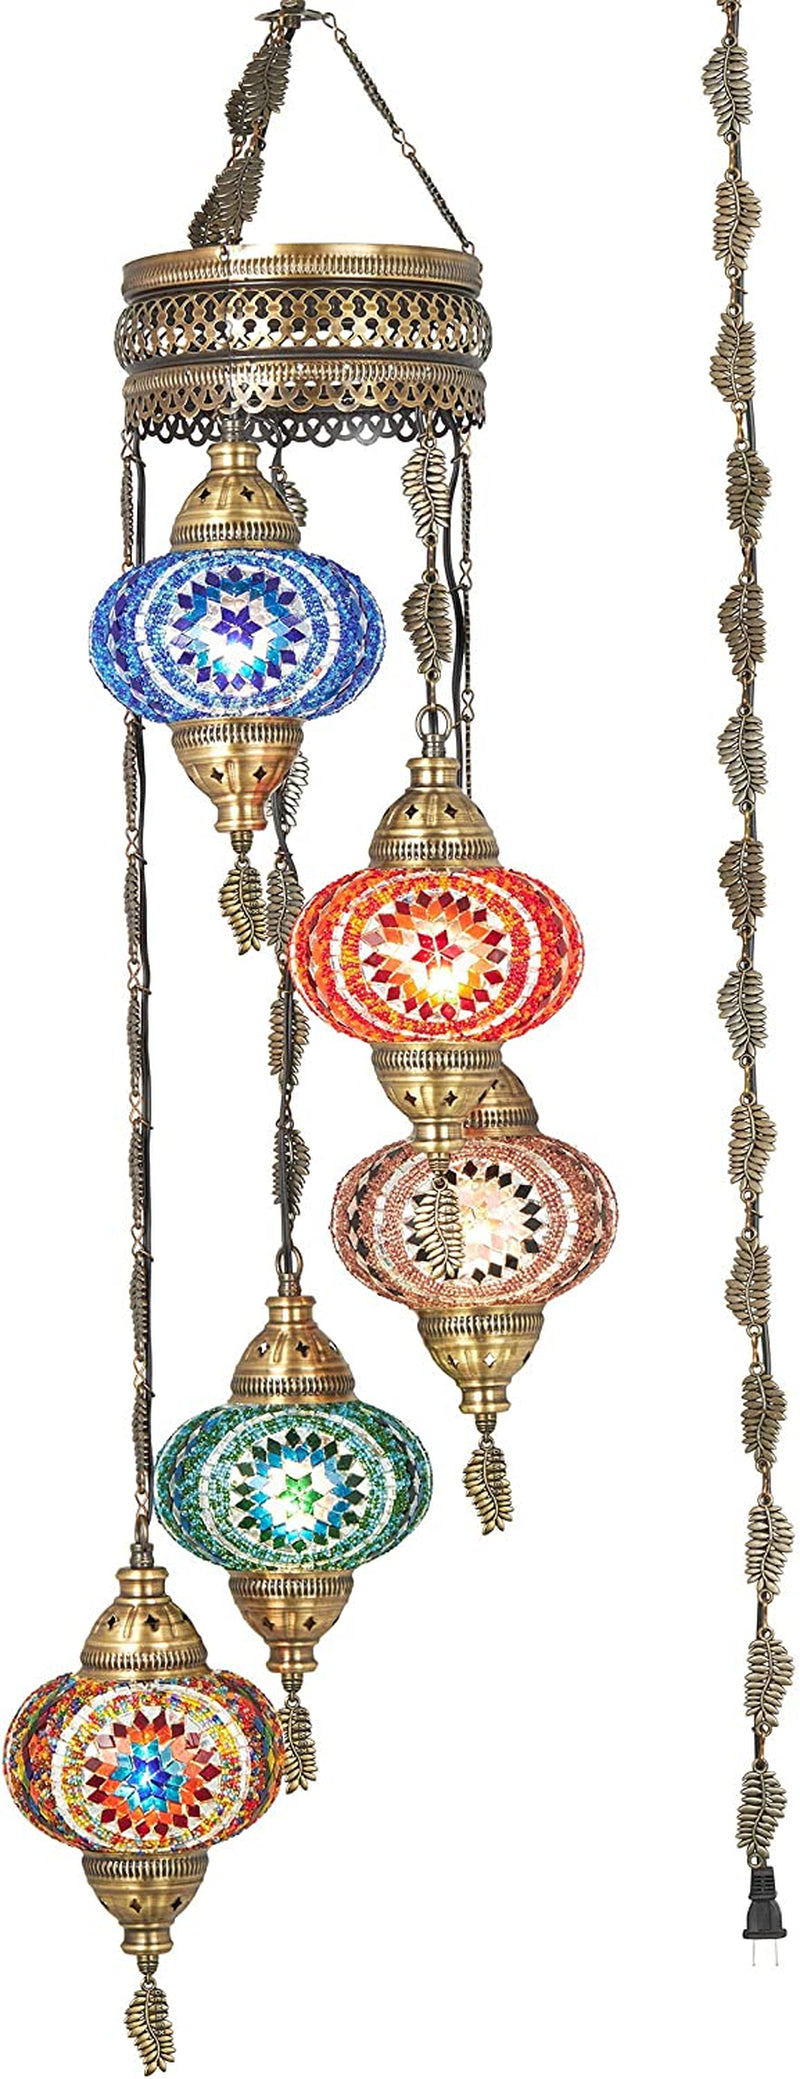 DEMMEX Turkish Moroccan Mosaic Hardwired or Swag Plug in Chandelier Light Ceiling Hanging Lamp Pendant Fixture, 5 Big Globes (5 X 7 Globes Swag) Home & Garden > Lighting > Lighting Fixtures > Chandeliers DEMMEX   